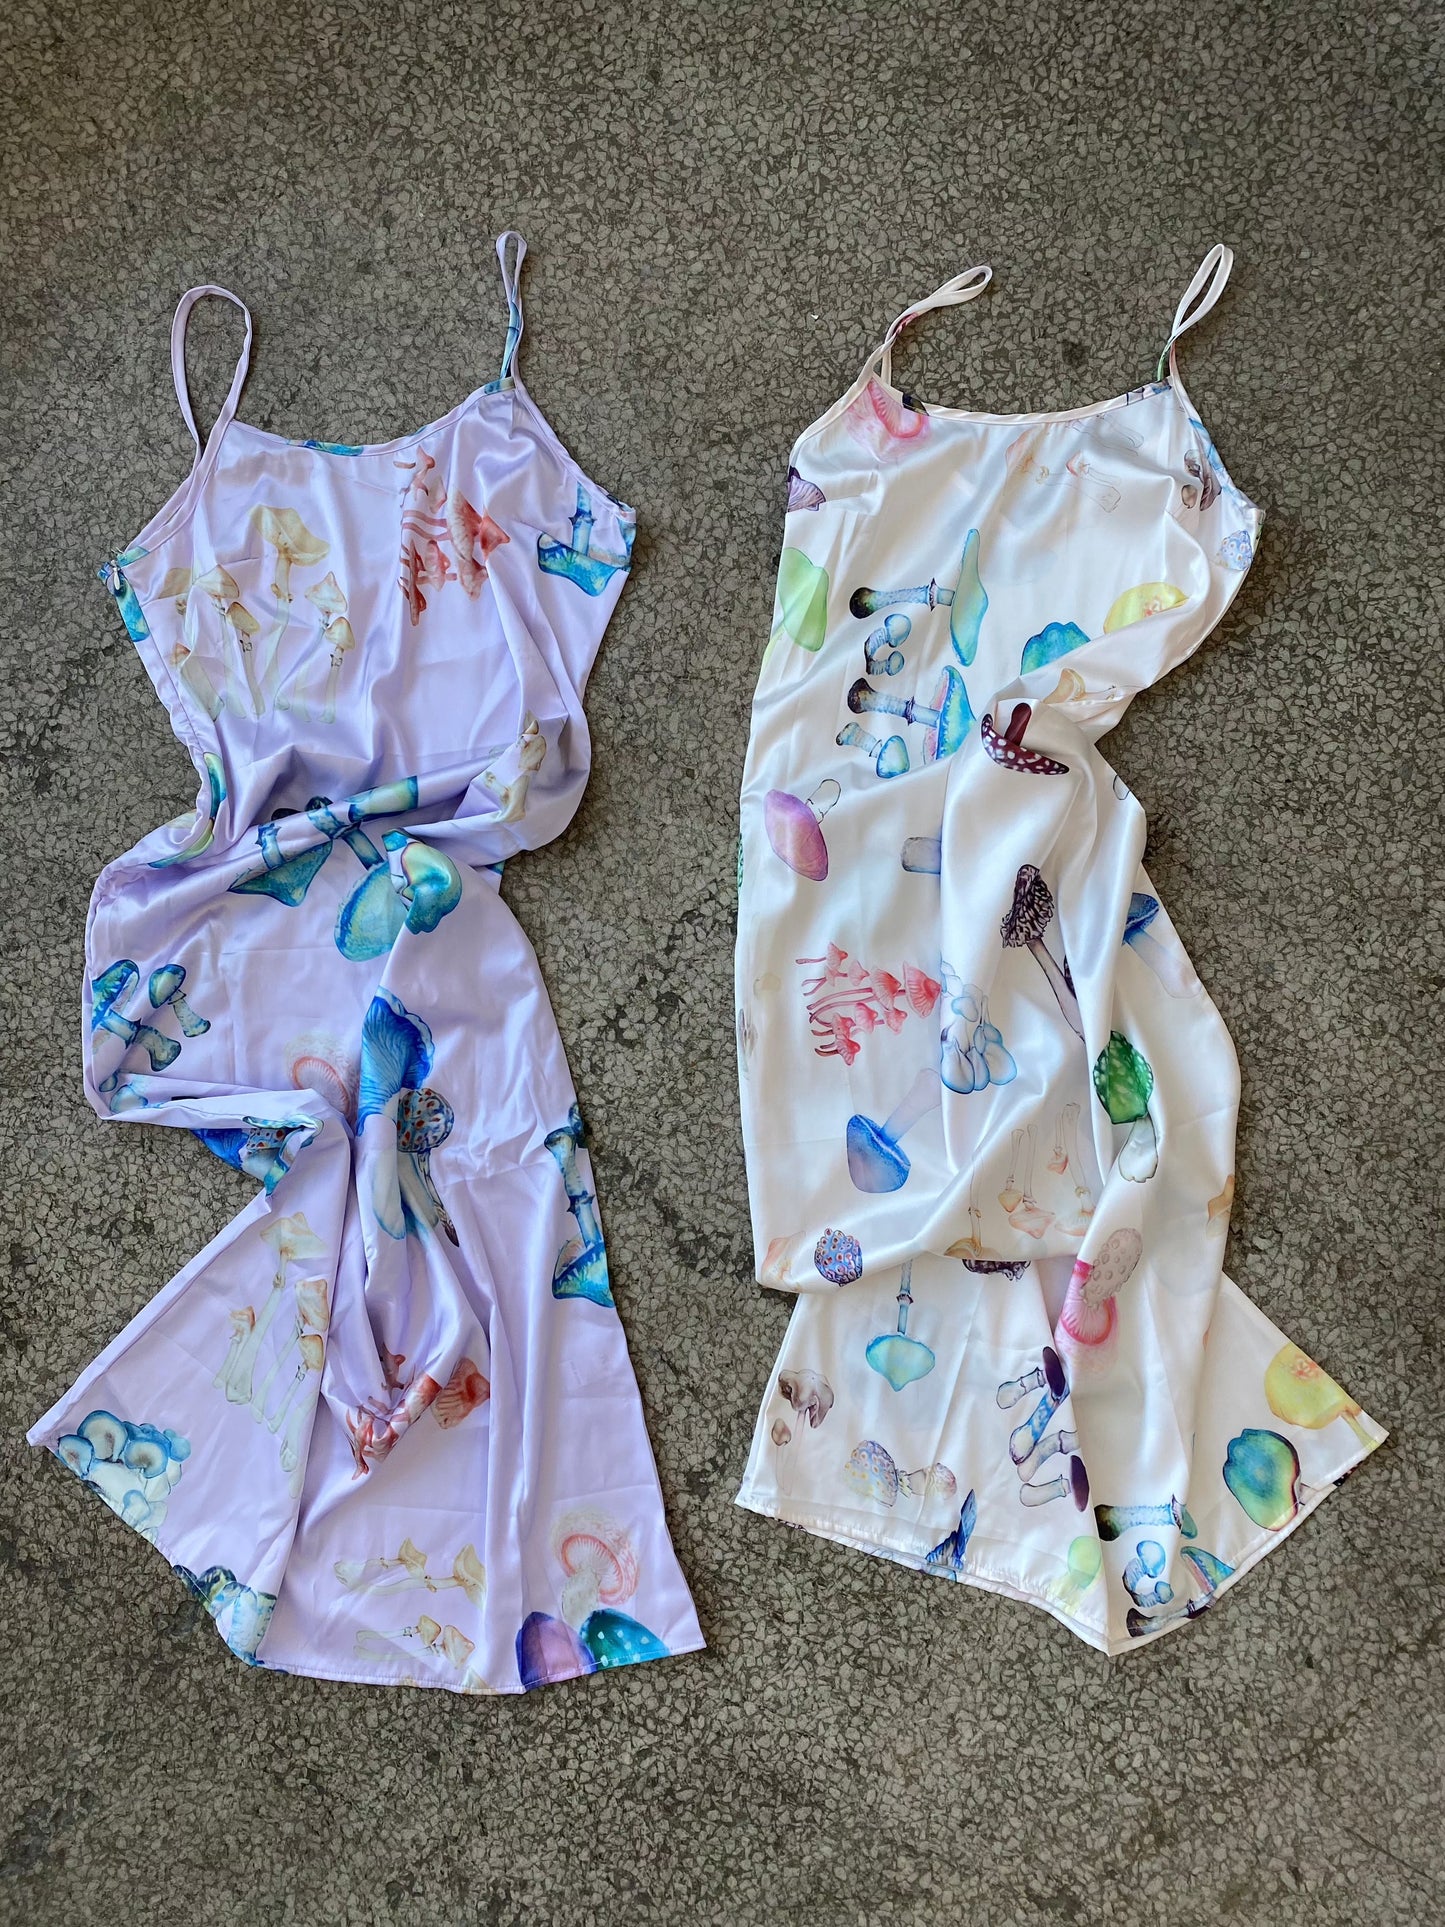 two slip dresses lay crumpled up on the concrete floor, one is lilac with a psychedlic mushroom print and the other has a pink base with a similar mushroom print